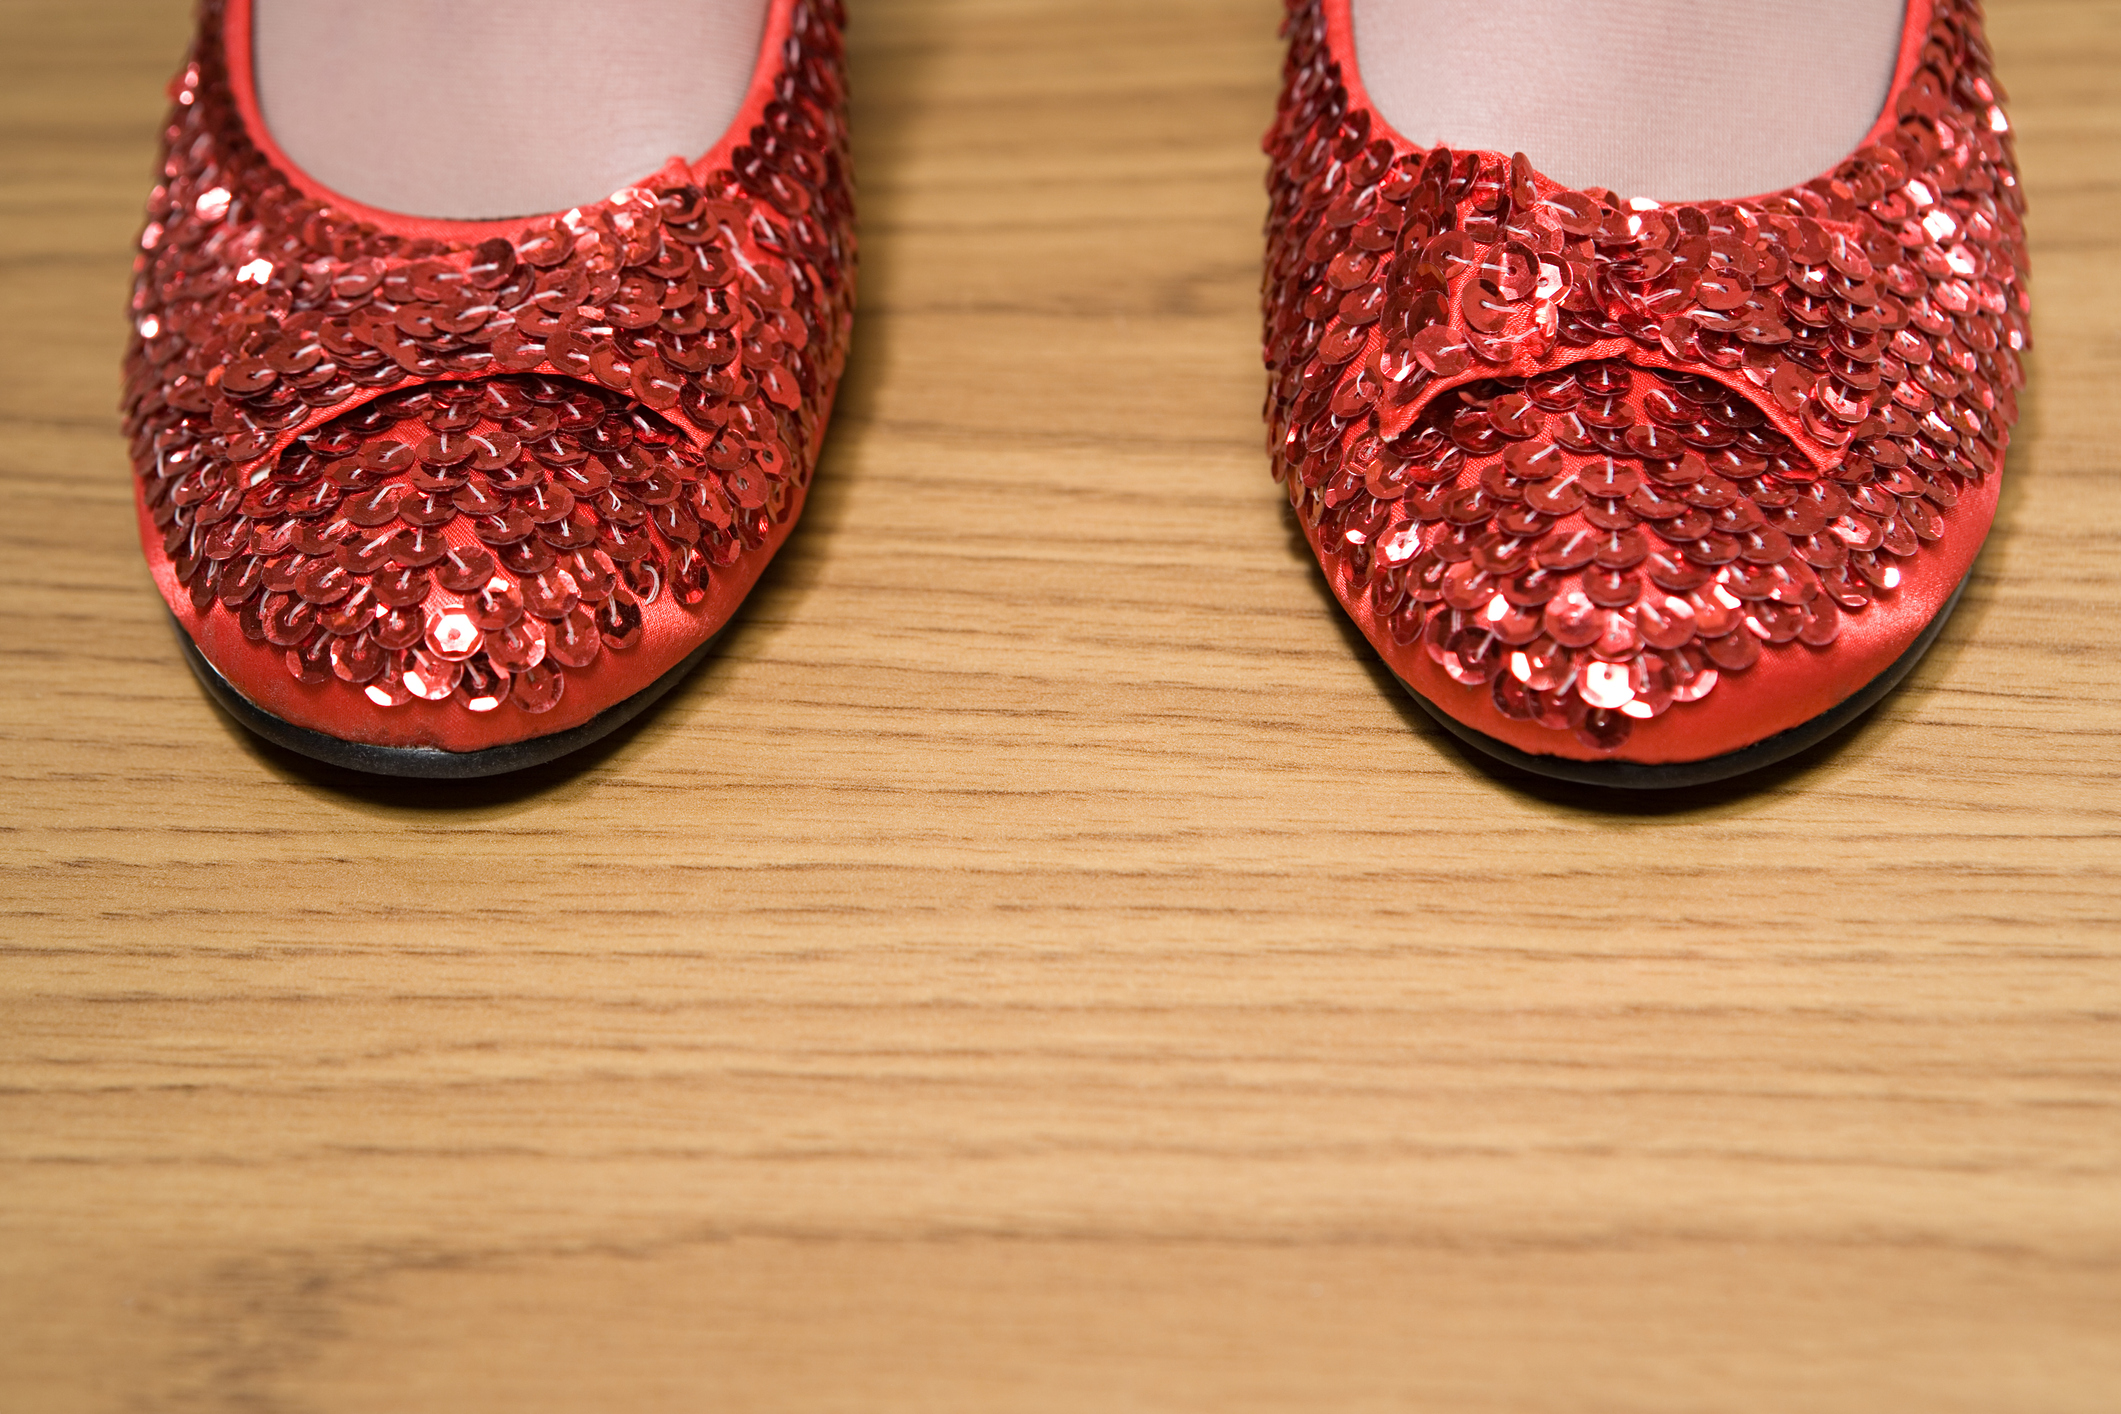 A pair of sparkly ruby red slippers on a wood surface.